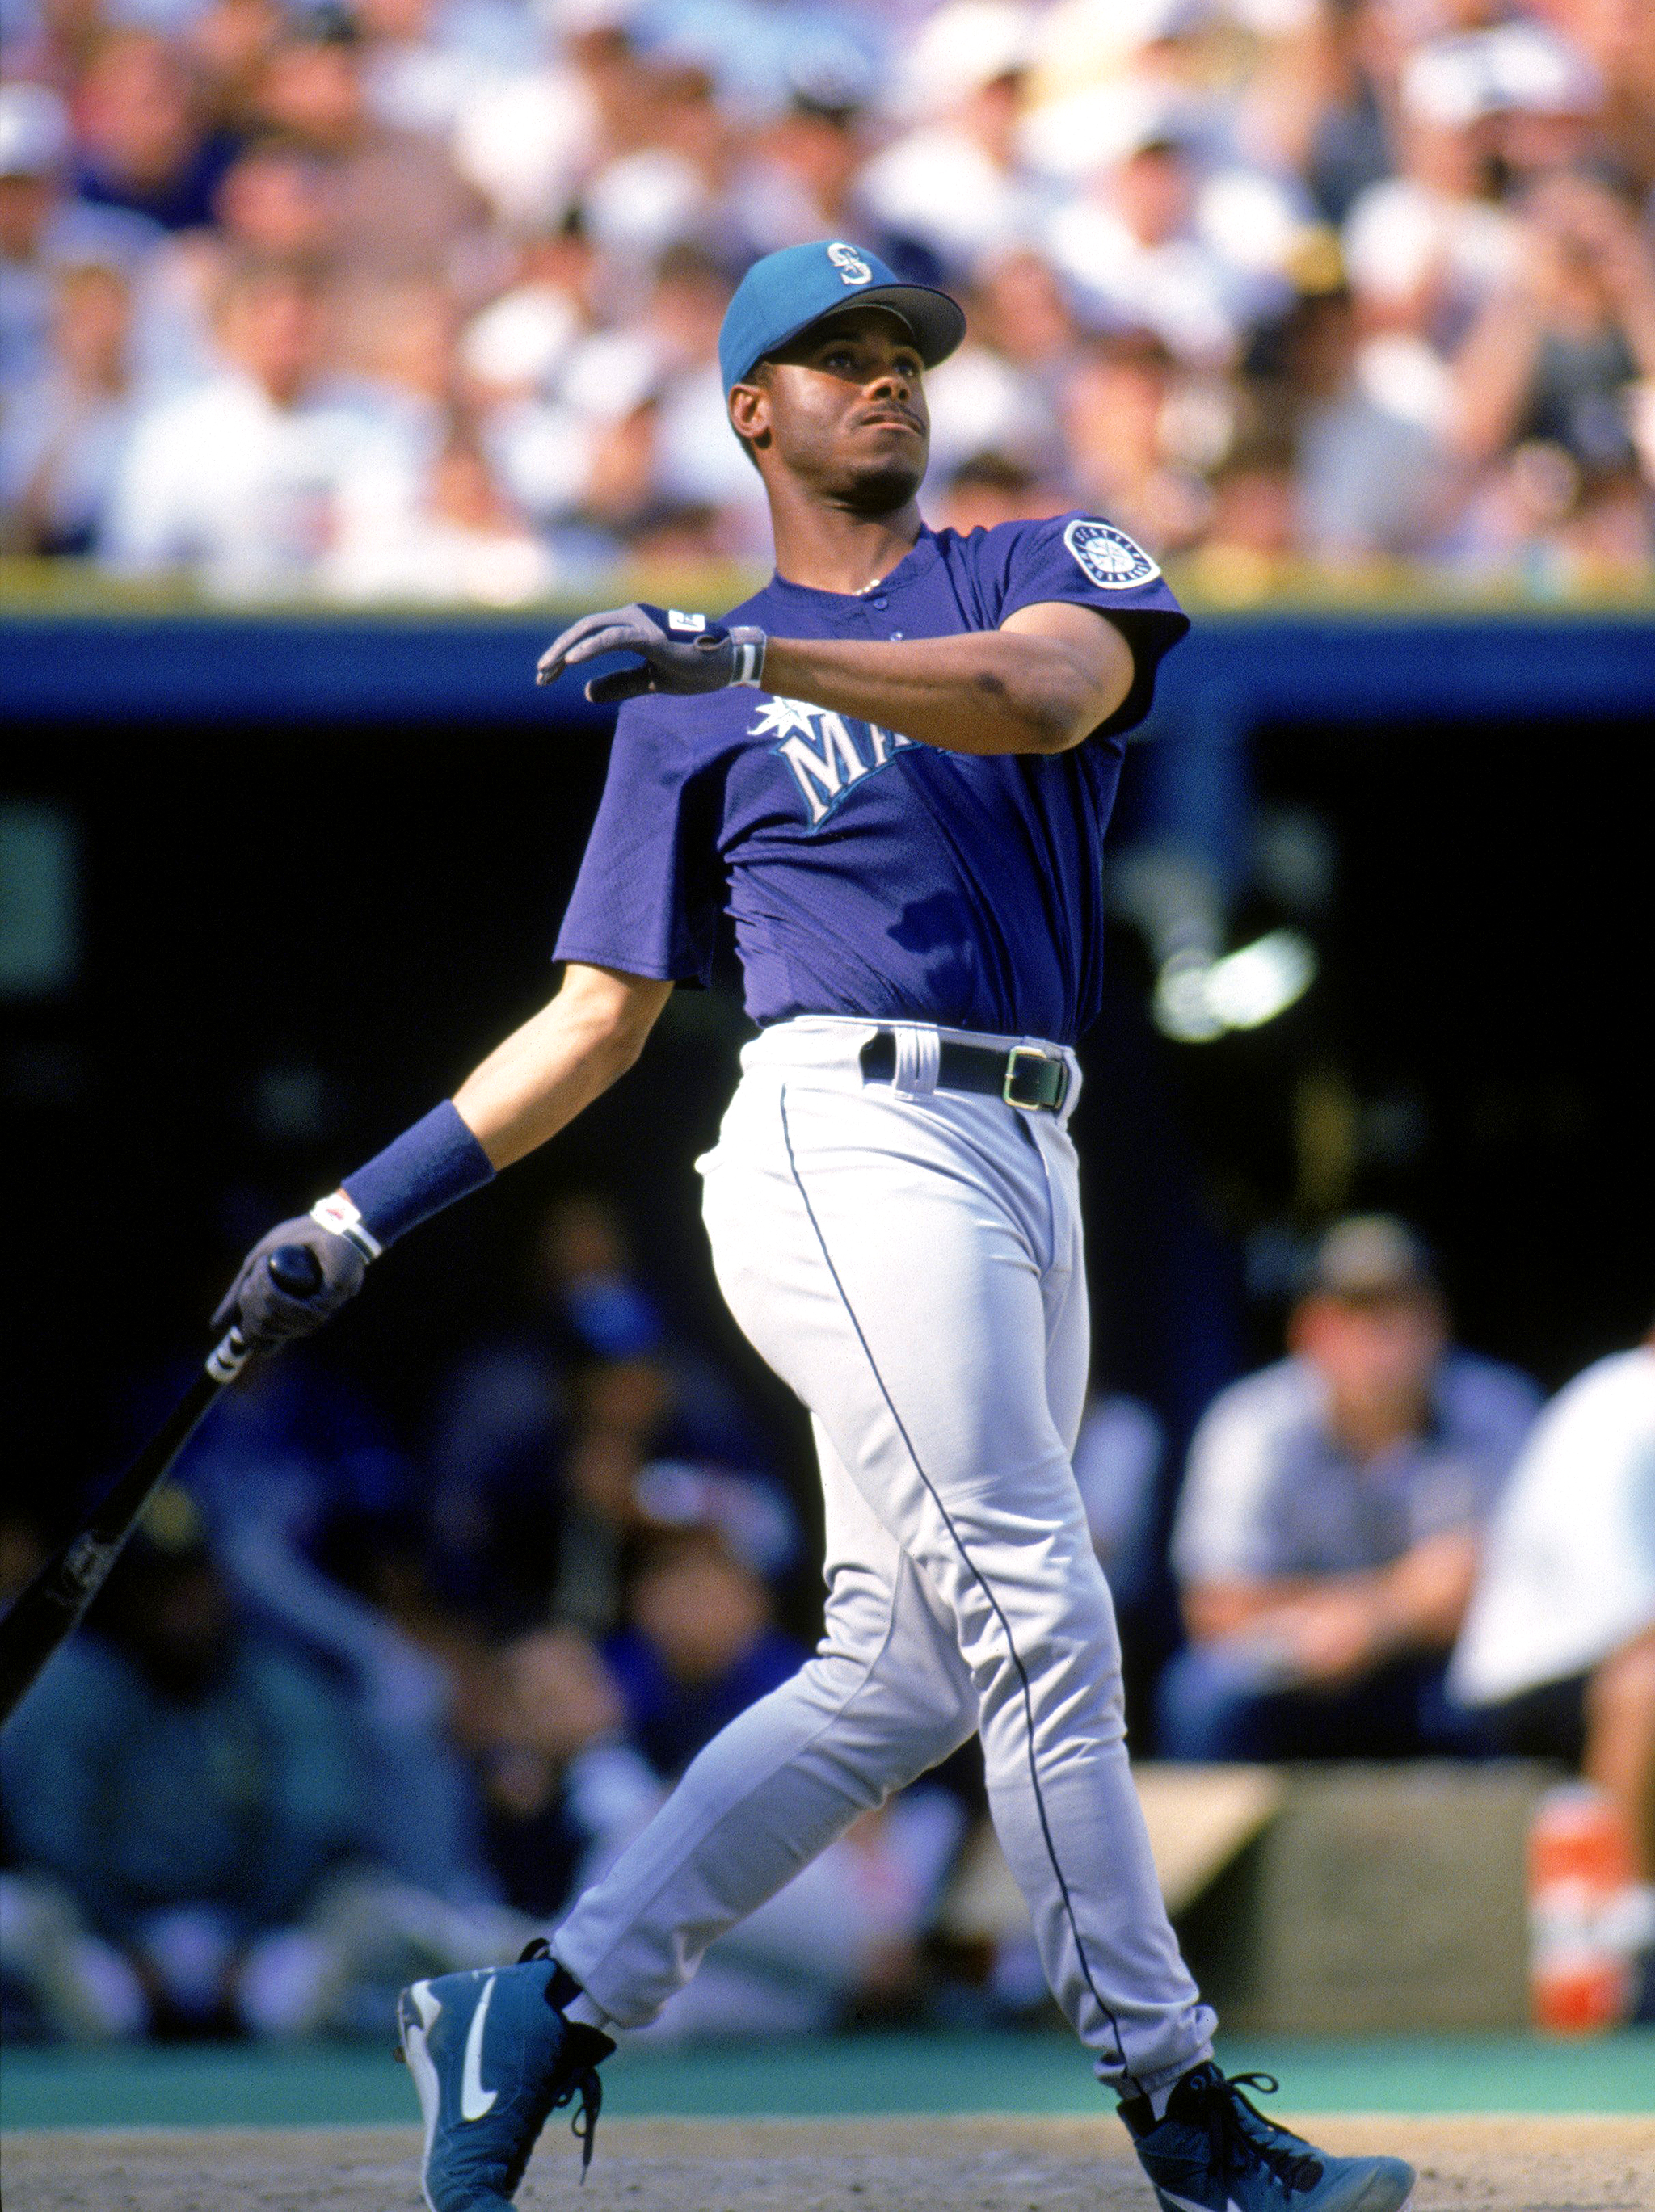 Relive the greatness of Ken Griffey Jr.'s 11th-inning, walk-off,  inside-the-park home run